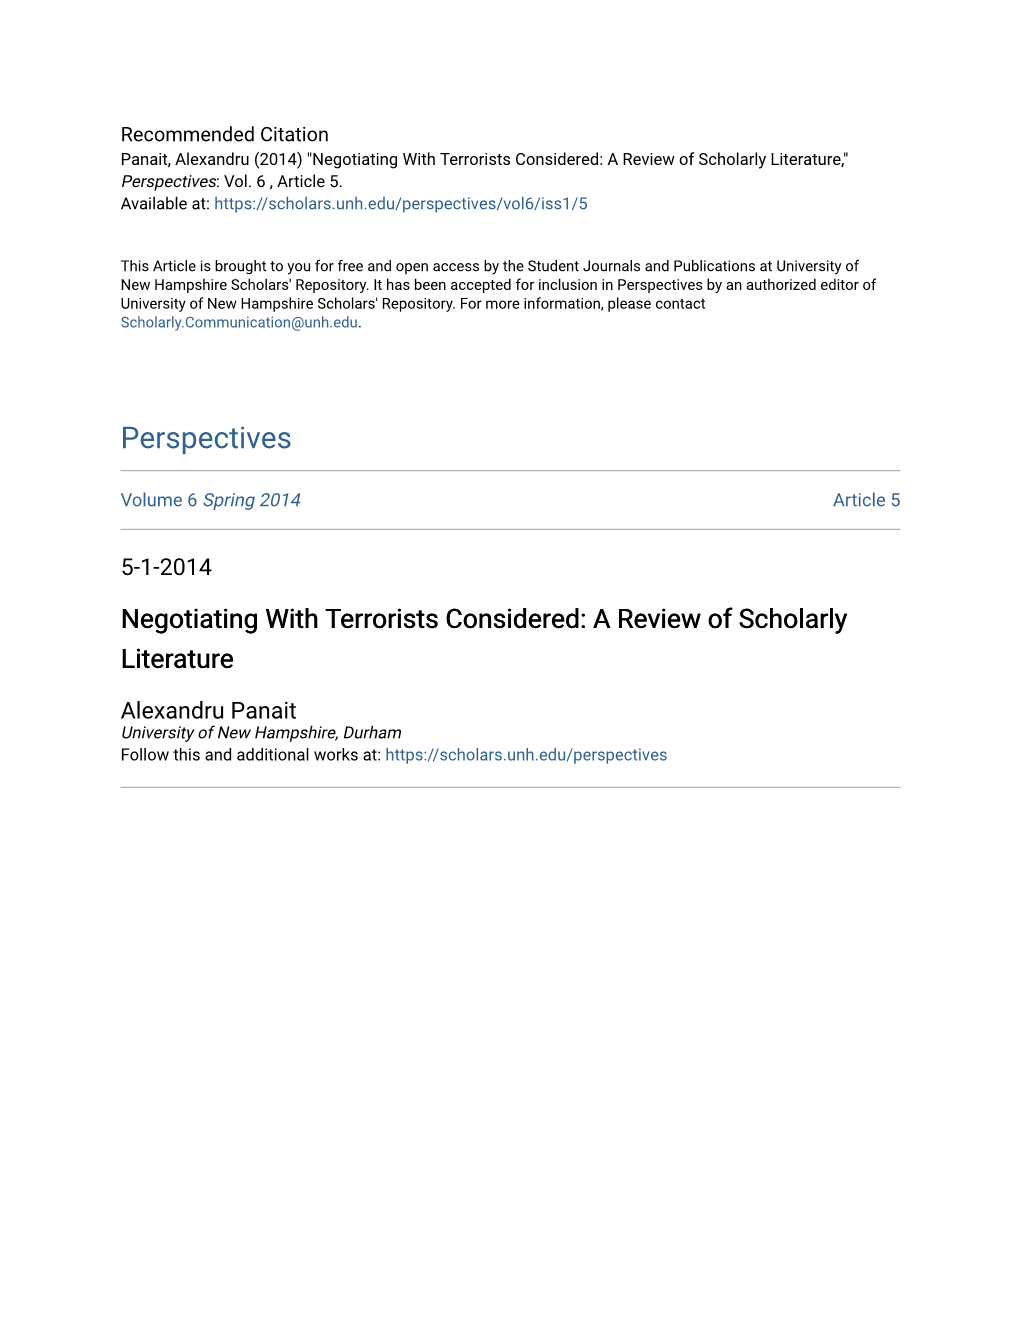 Negotiating with Terrorists Considered: a Review of Scholarly Literature," Perspectives: Vol